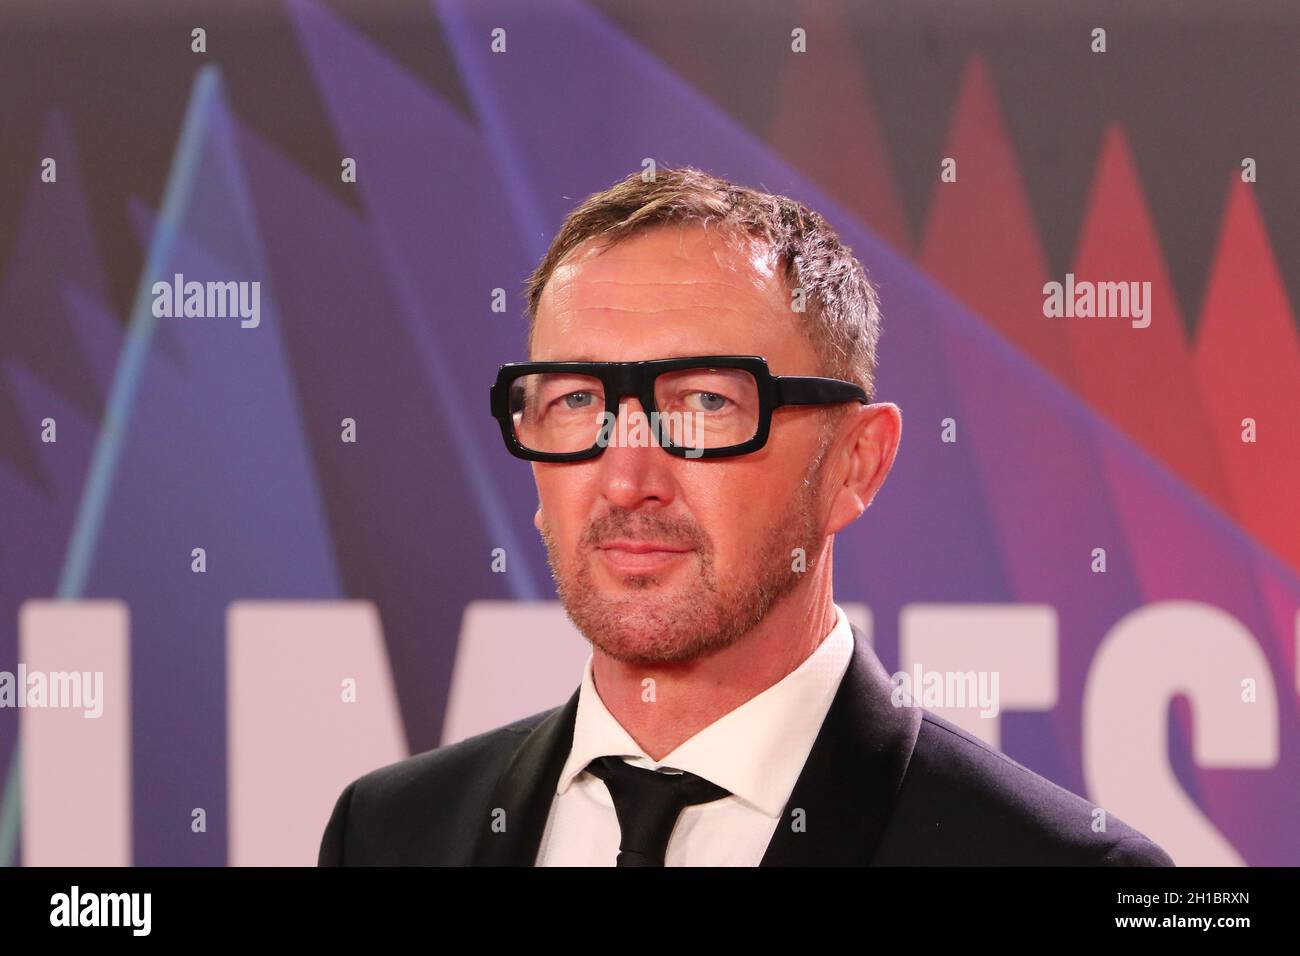 Ralph Ineson, The Tragedy of Macbeth, 65th BFI London Film Festival, Royal Festival Hall - Southbank Centre, London, UK, 17 October 2021, Photo by Ric Stock Photo